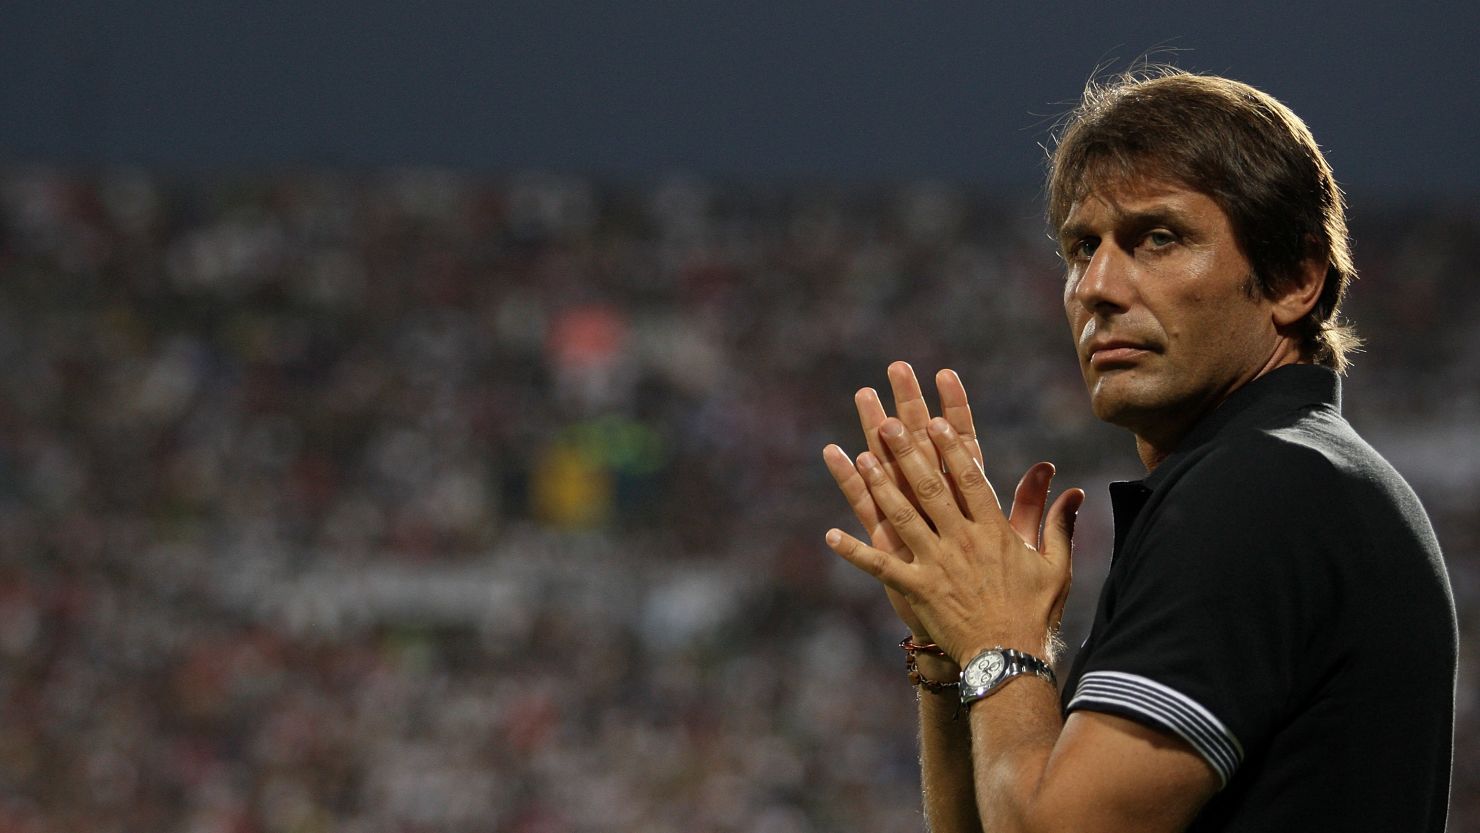 Juventus Antonio Conte was originally banned for 10 months but can now return in December.